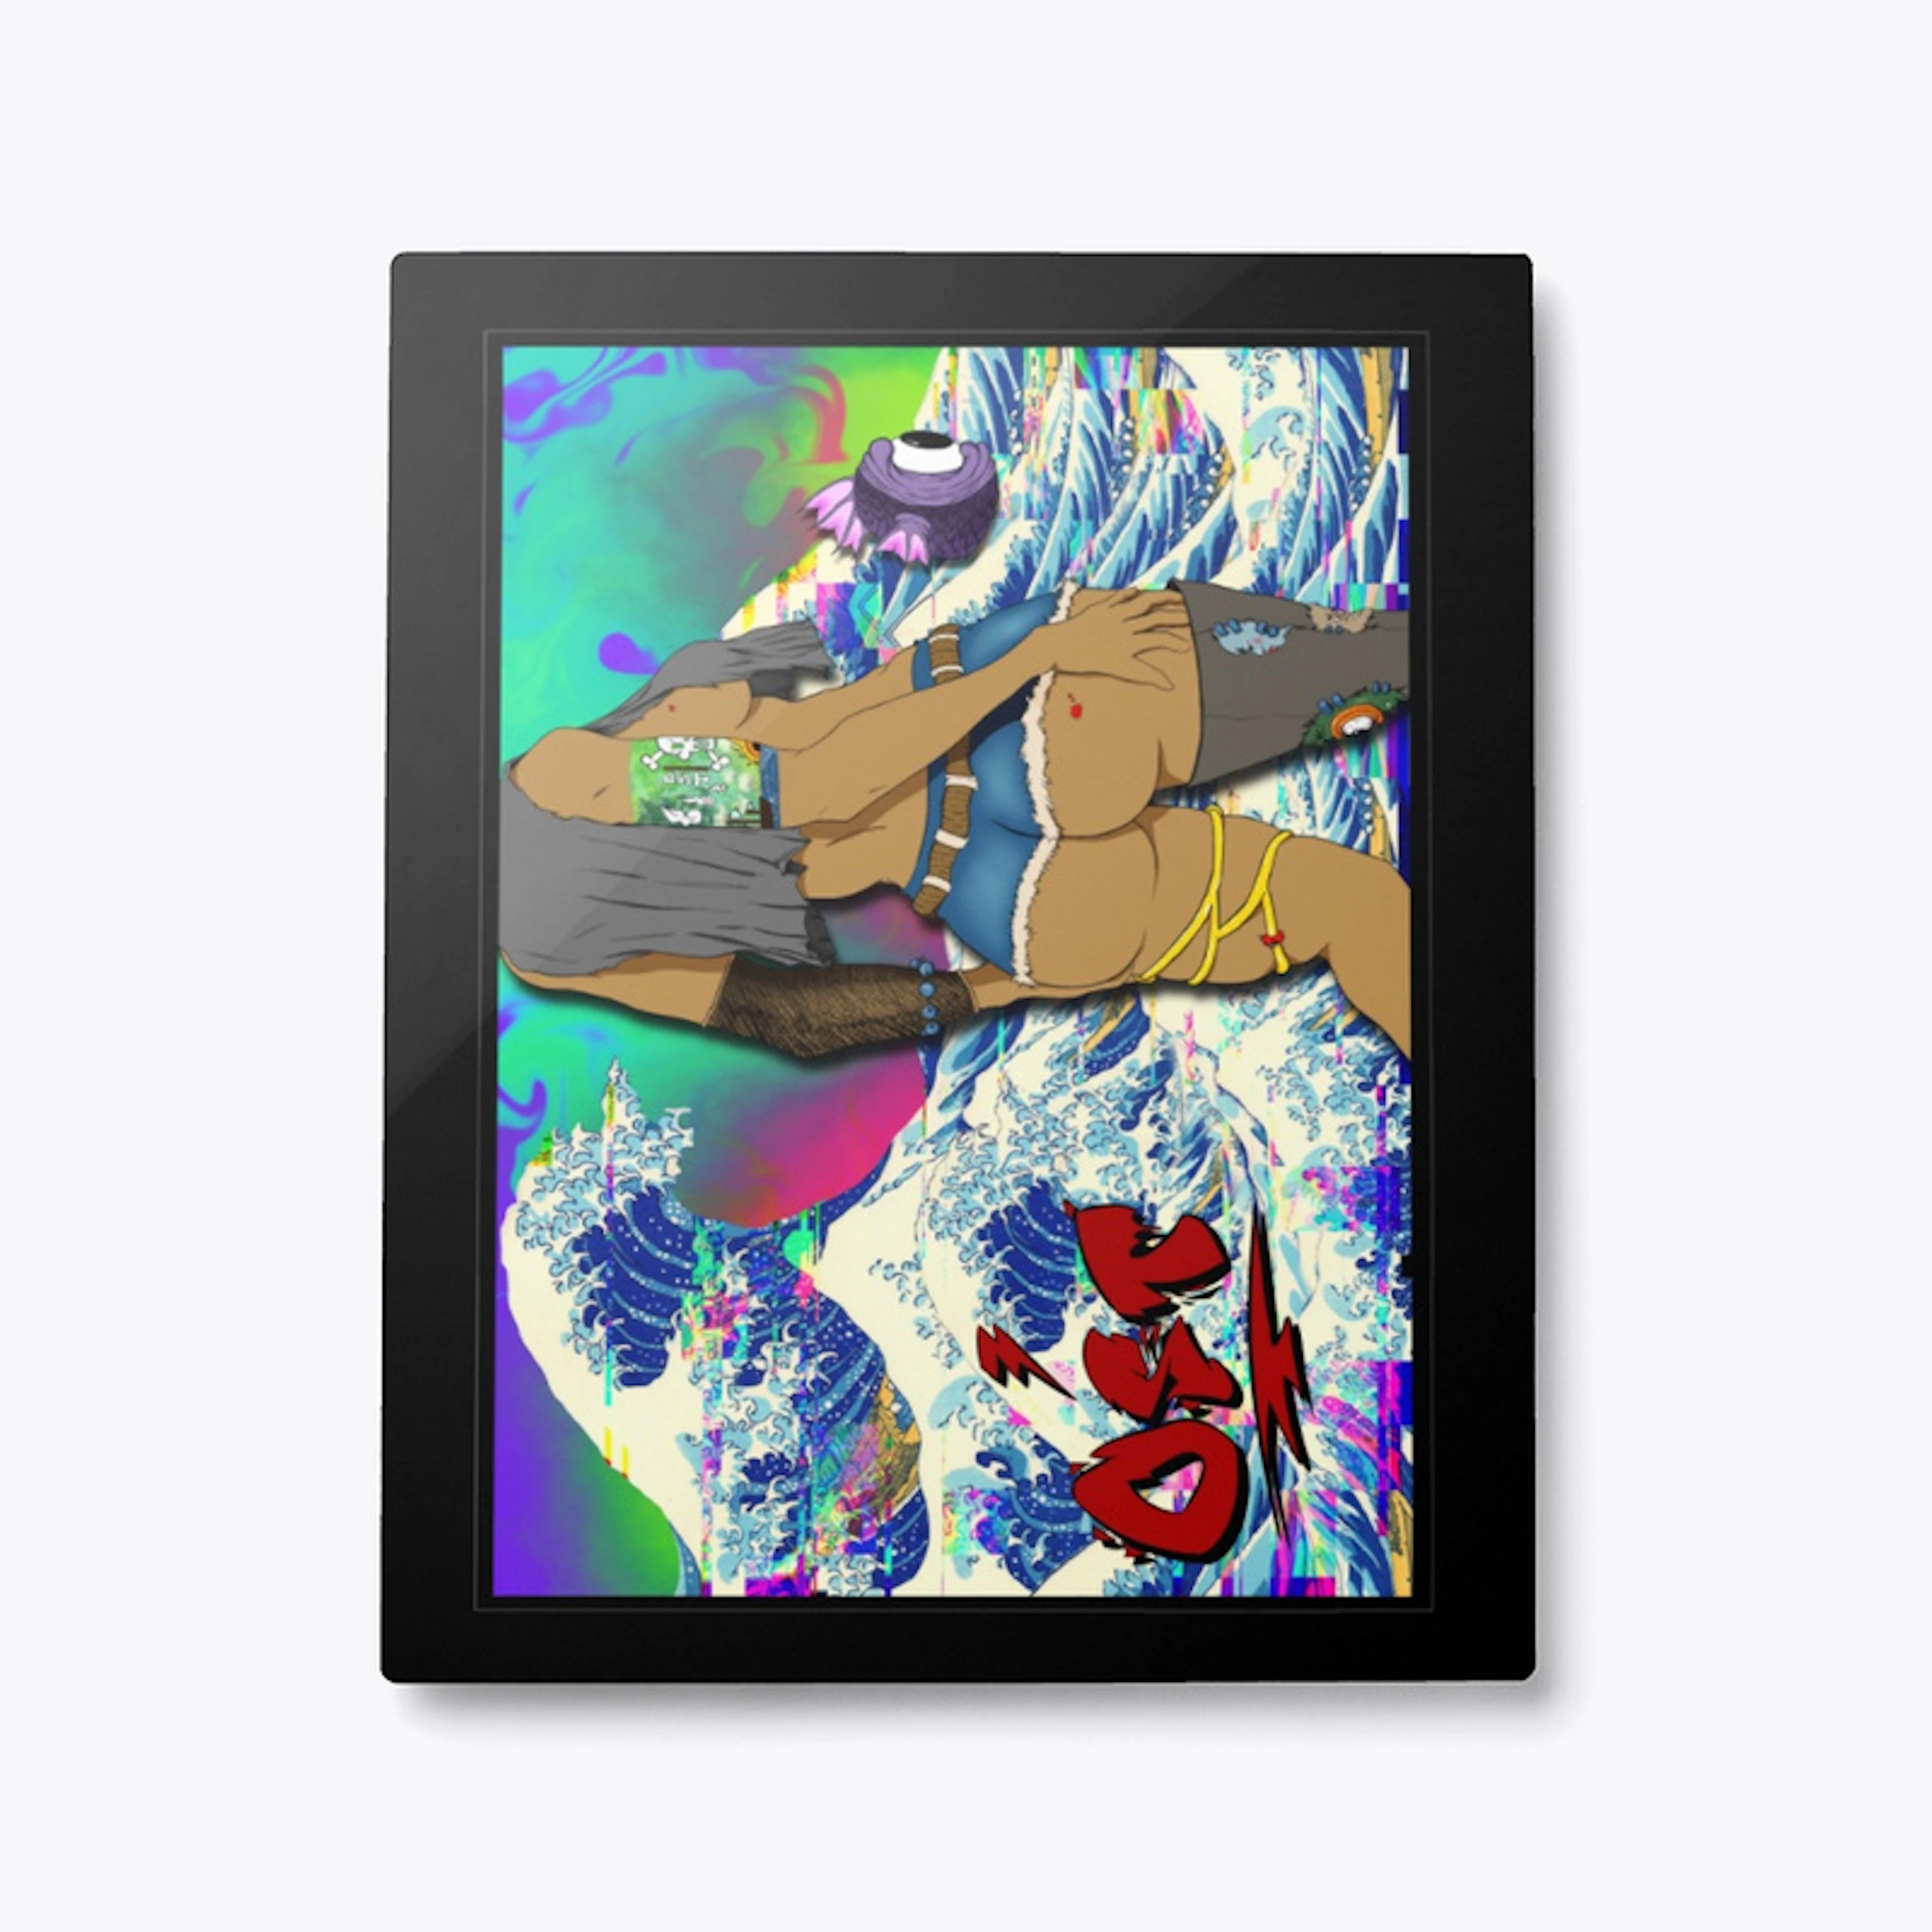 Ost Ocean Prints, Puzzles, and Stickers